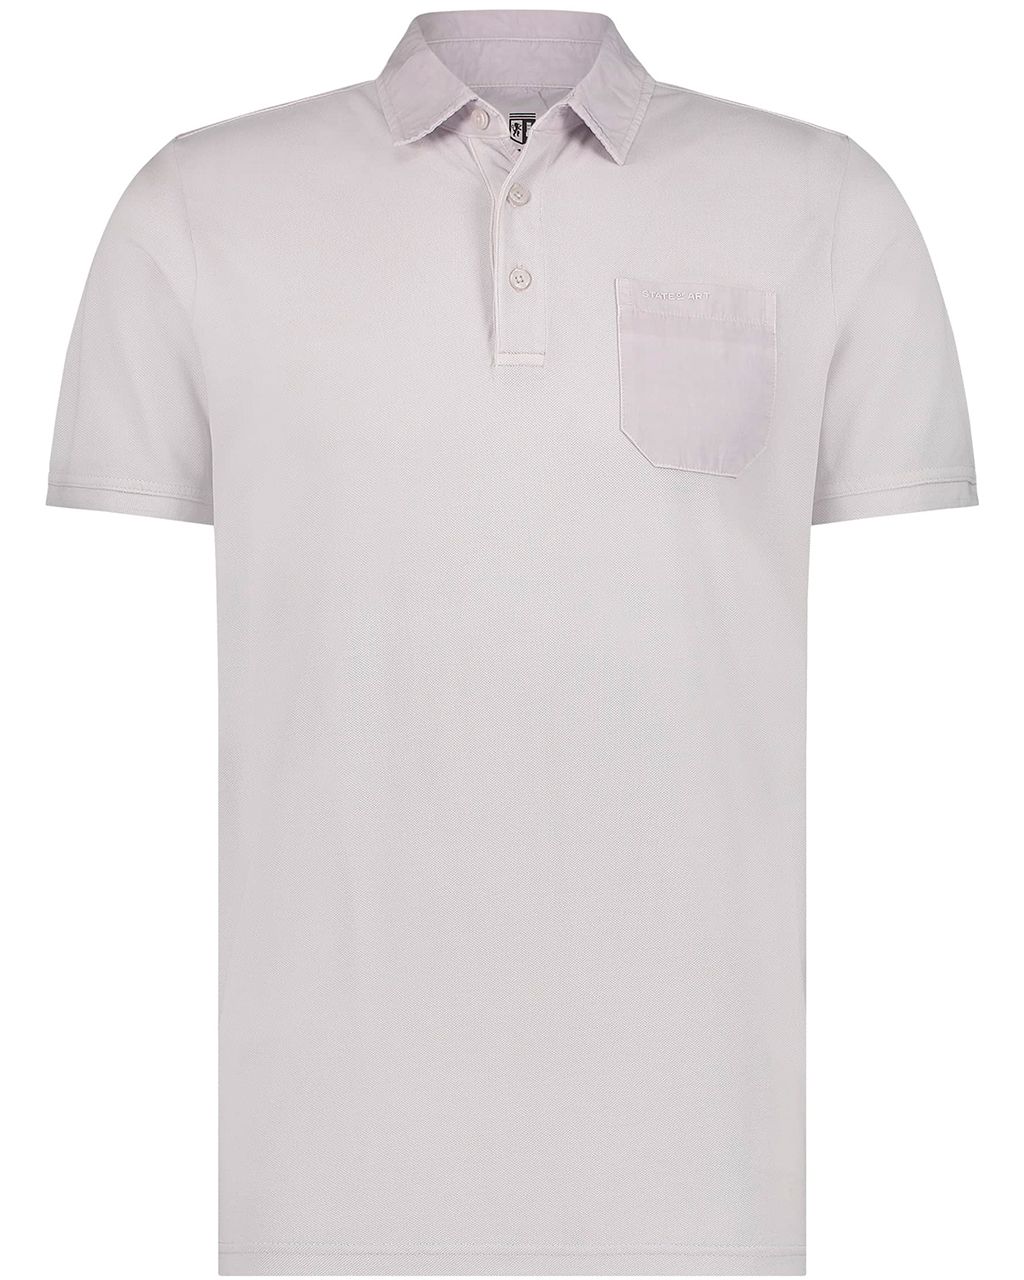 State of Art Polo KM Wit 075970-001-4XL